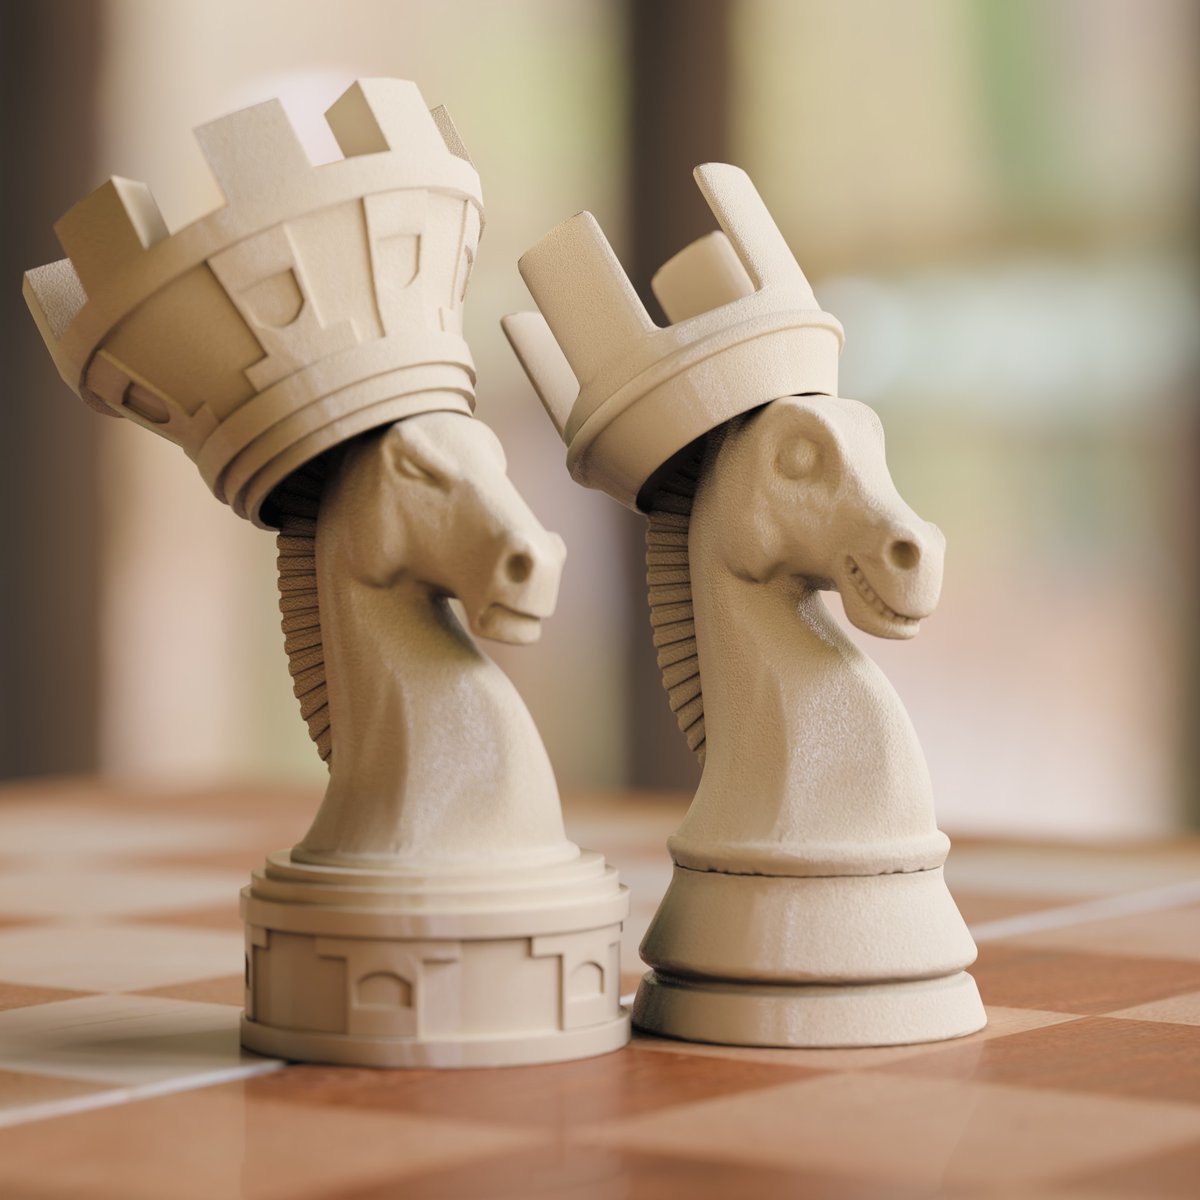 The knook and the castallion
The new Garry Chess 2.0 pieces.

#chess #Chesscomglobal #lichess #blender #Blender3d